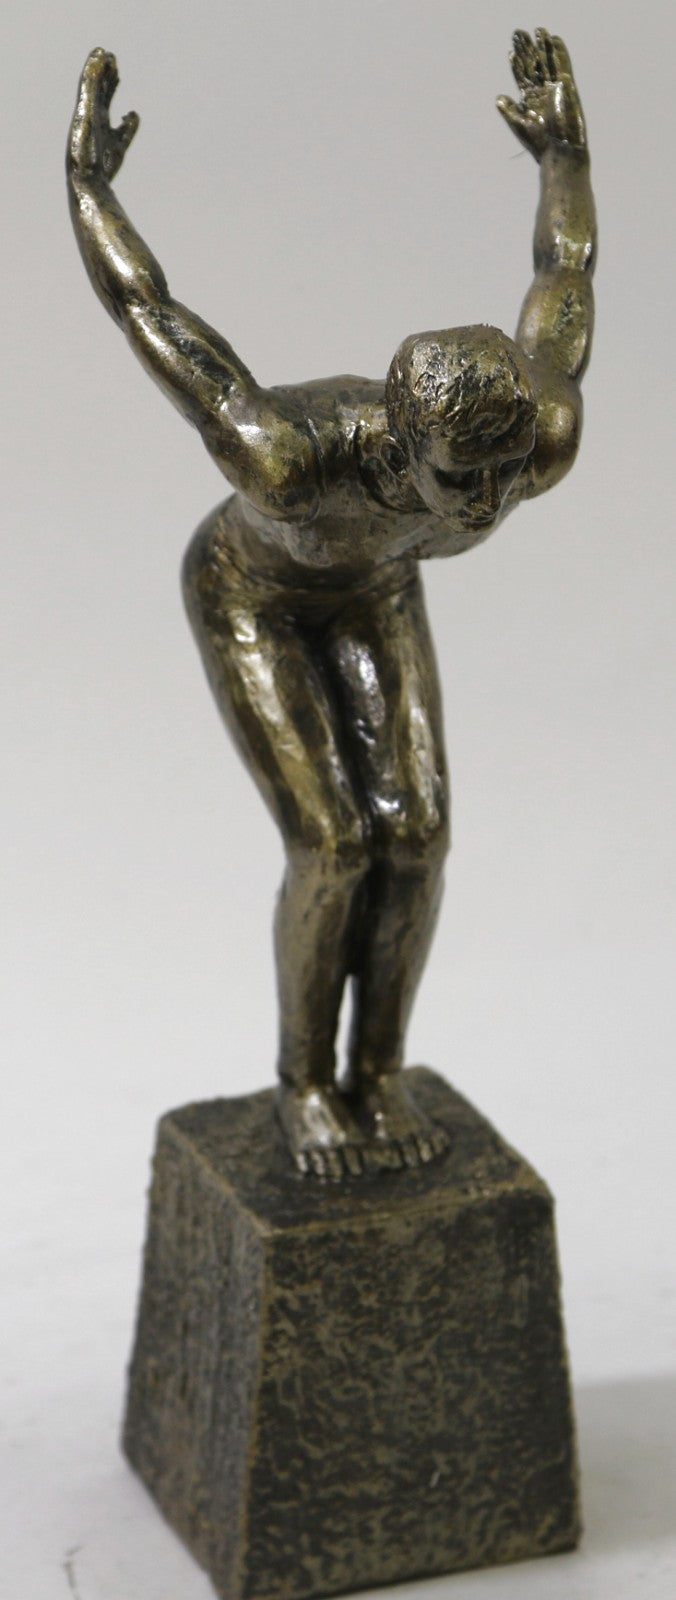 Hand Made Musular Man Swimming Trophy Diver Faux Bronze Sculpture Statue Figure